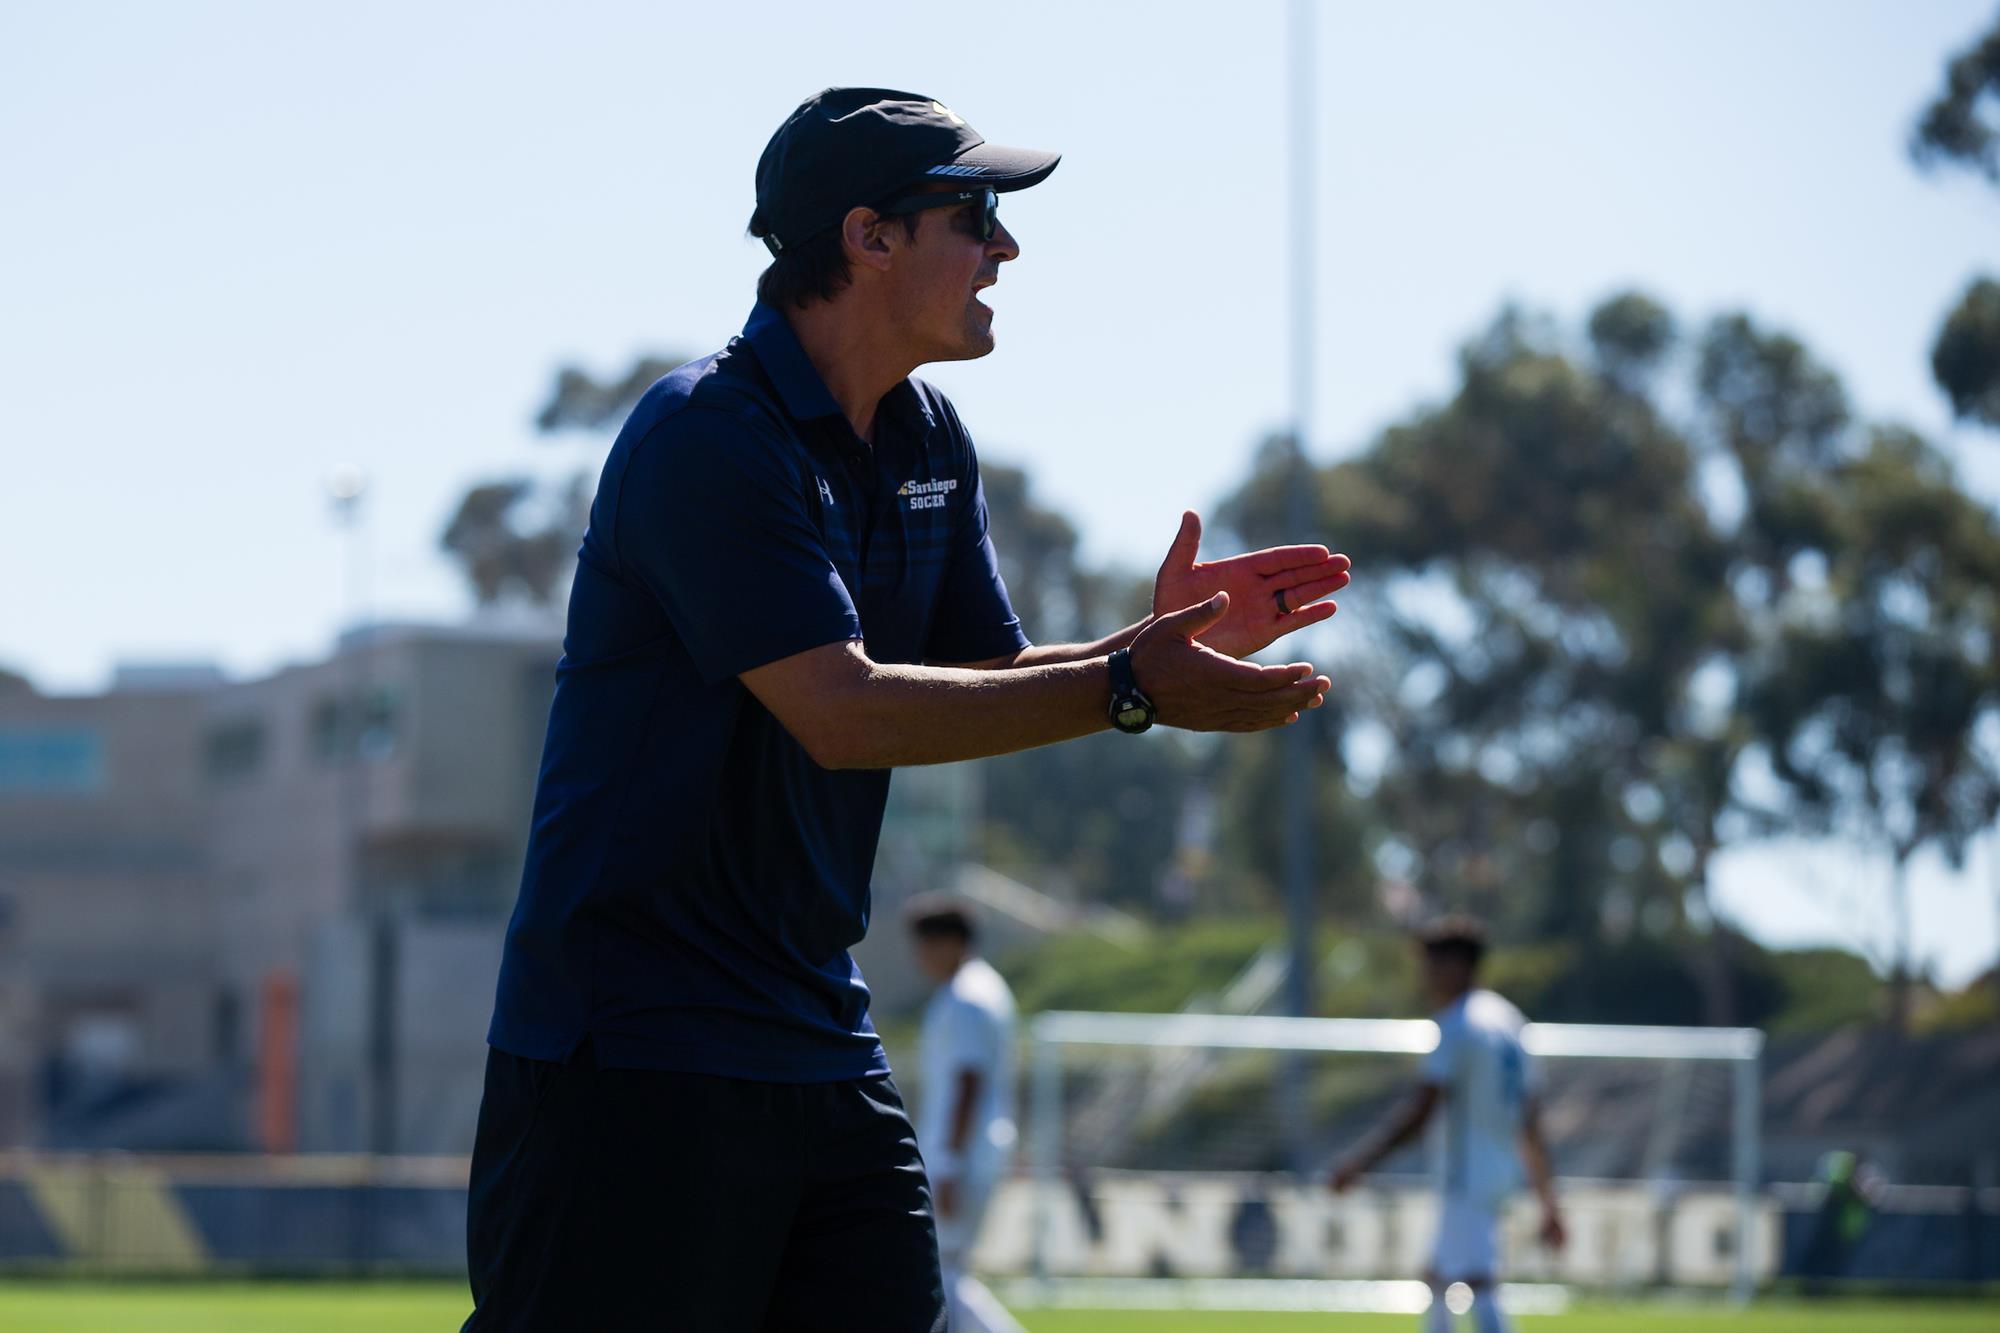 Coach Jon Pascale on the Division I Transition and the 2021 Season